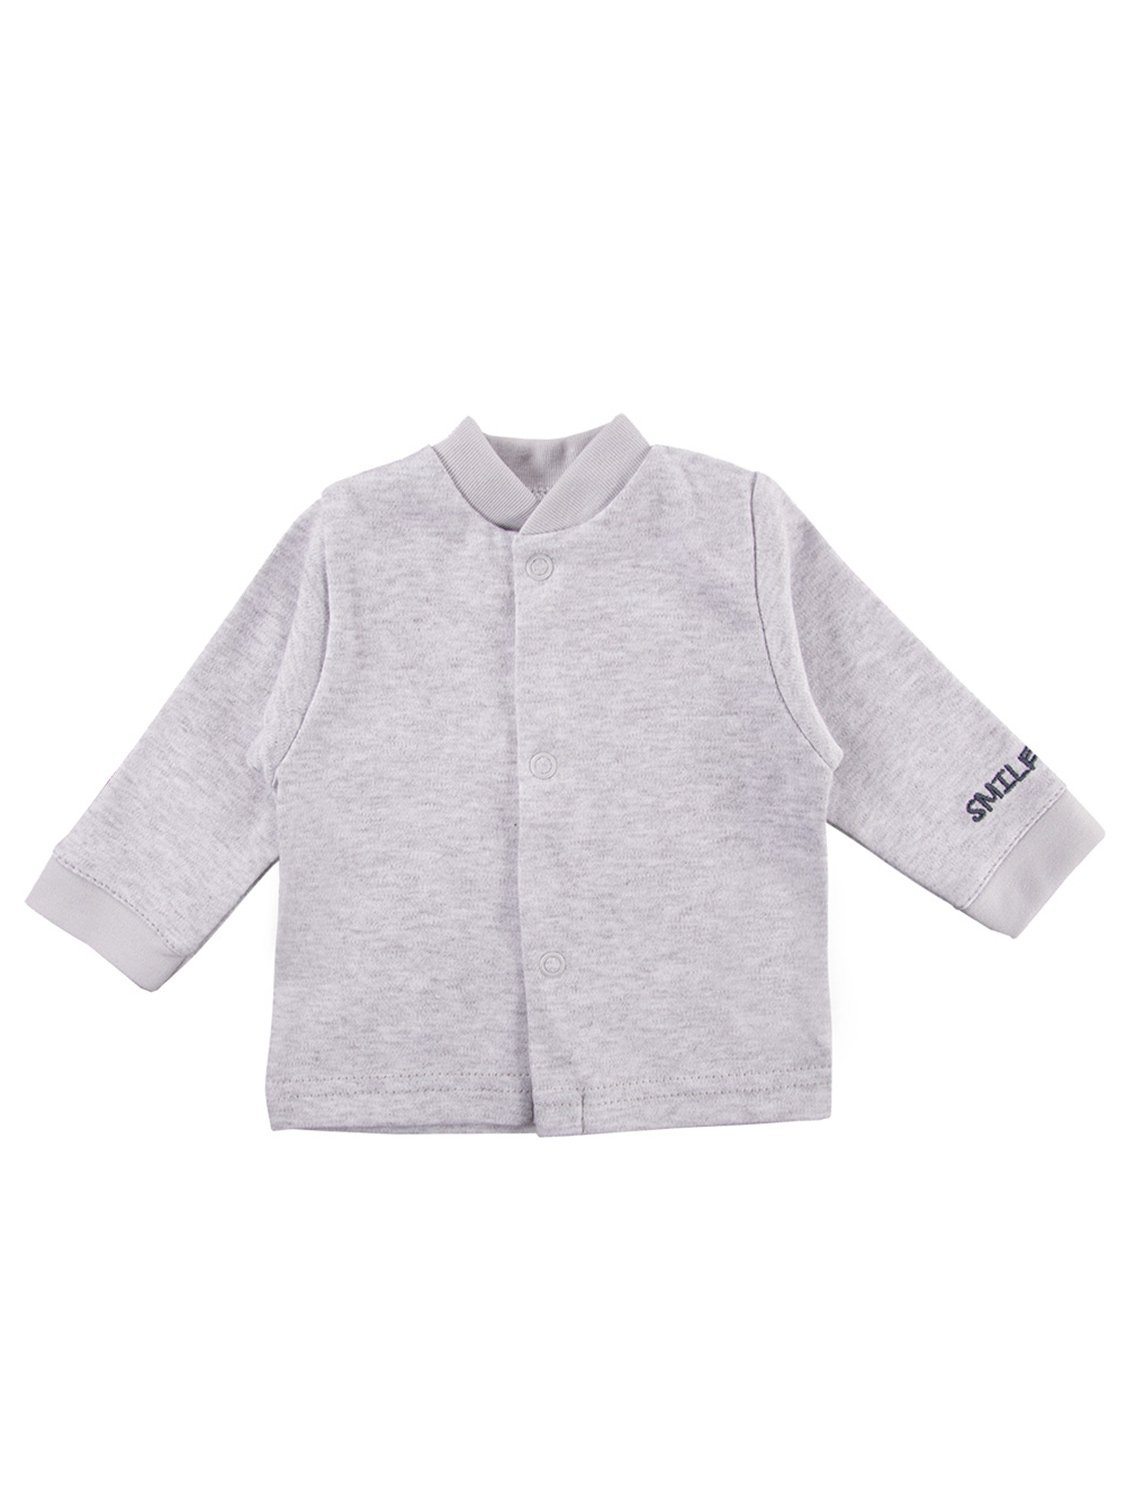 Early Baby Long Sleeved Top, "Smile Zebra" Embroidery, Grey - Top / T-shirt - EEVI